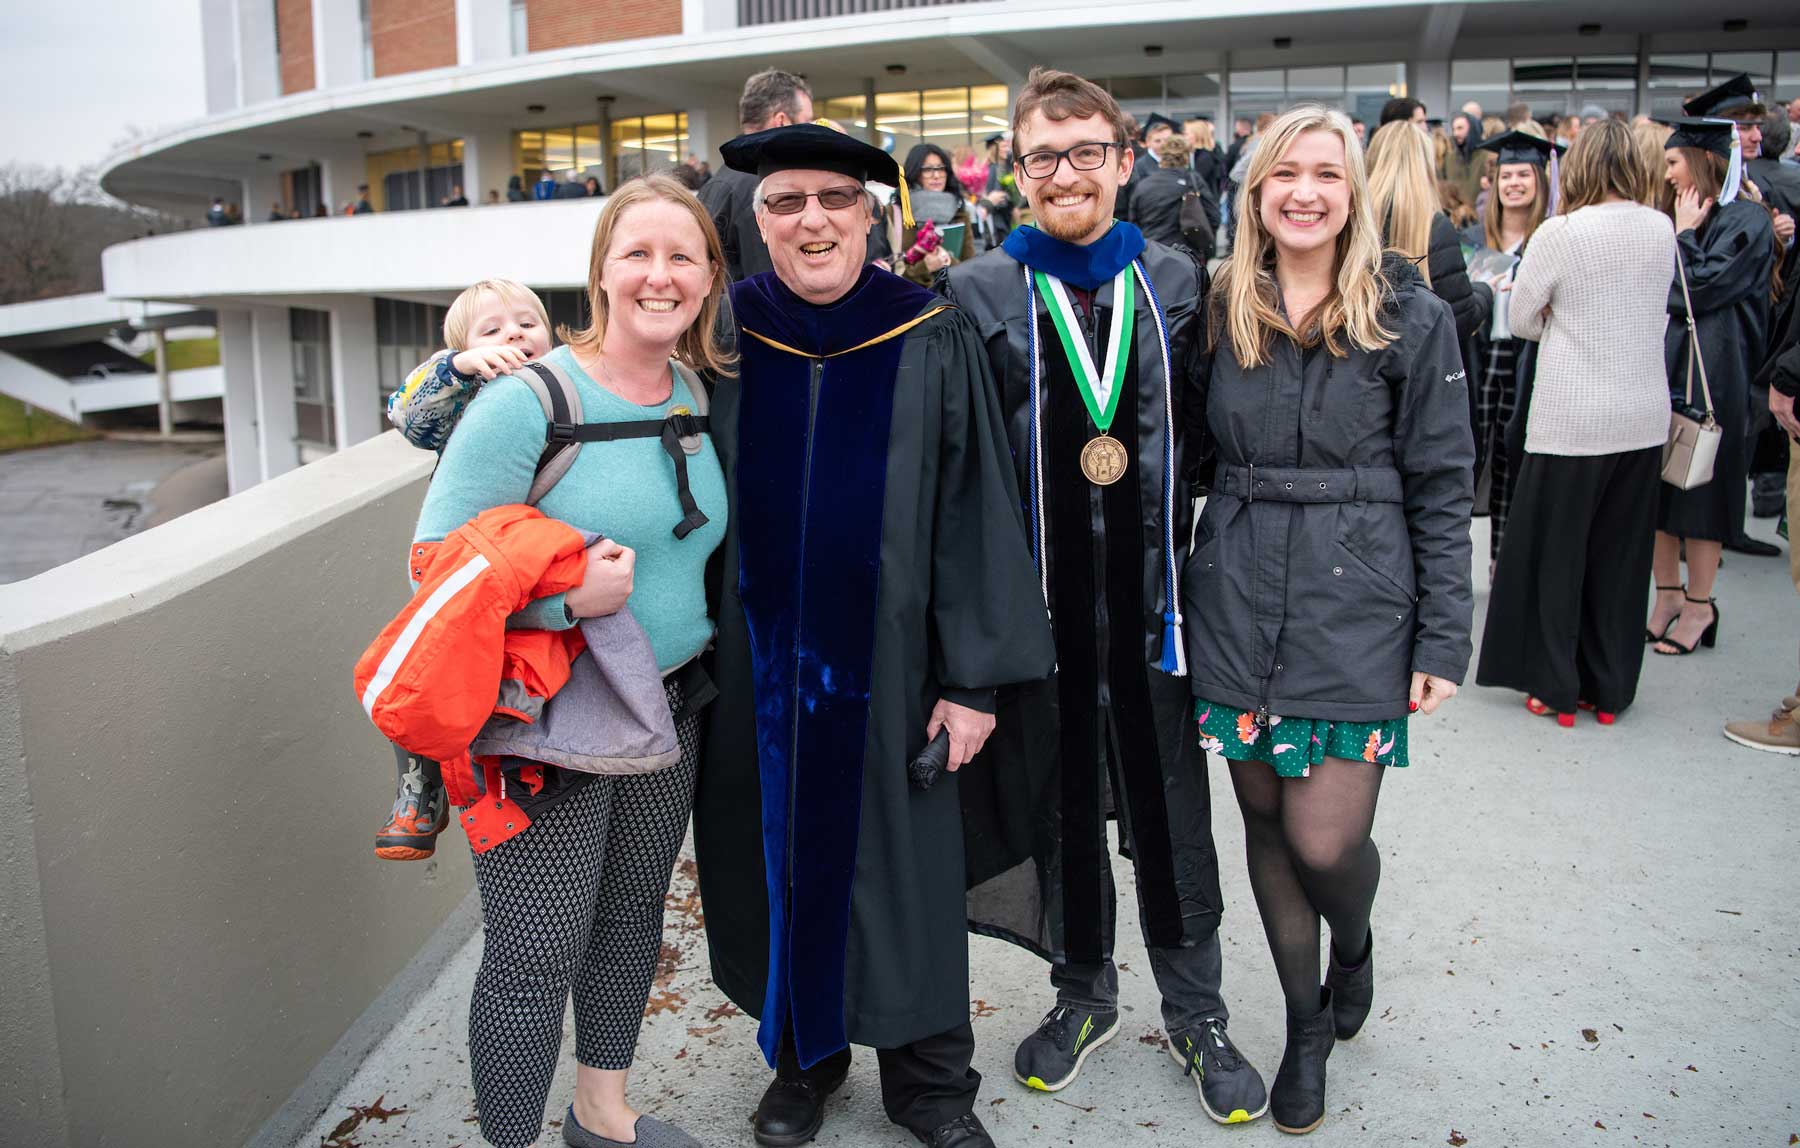 A family posing outside the Convo after 2019 Fall Graduation